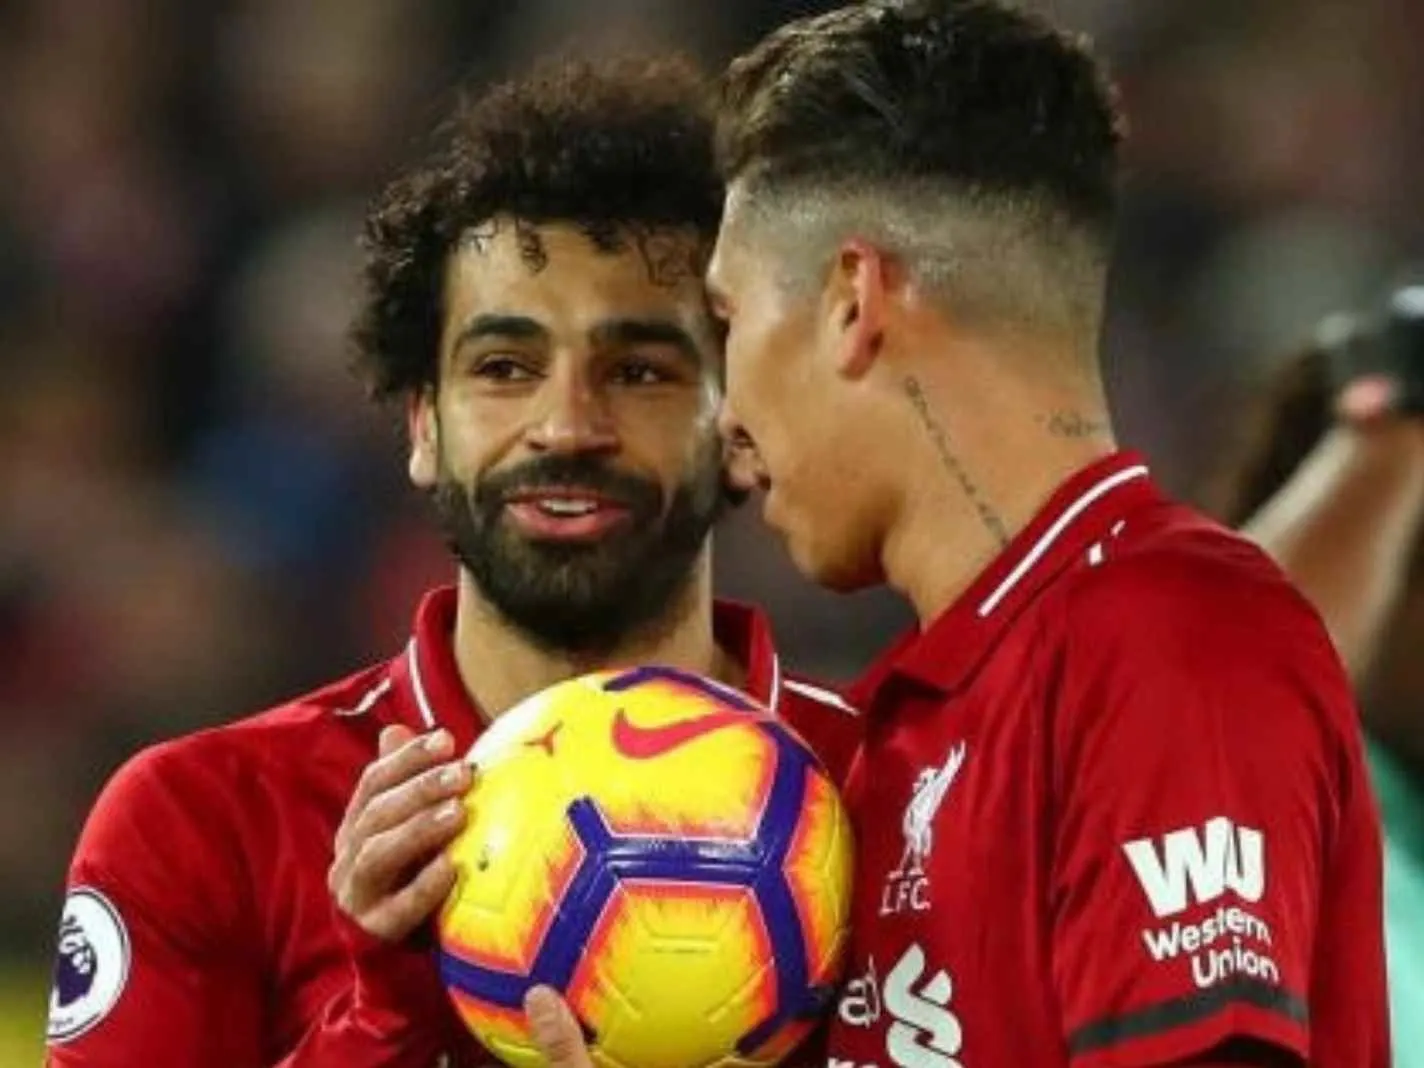 The photo shows Mohamed Salah and Roberto Firmino holding a football during a Liverpool game against Arsenal.